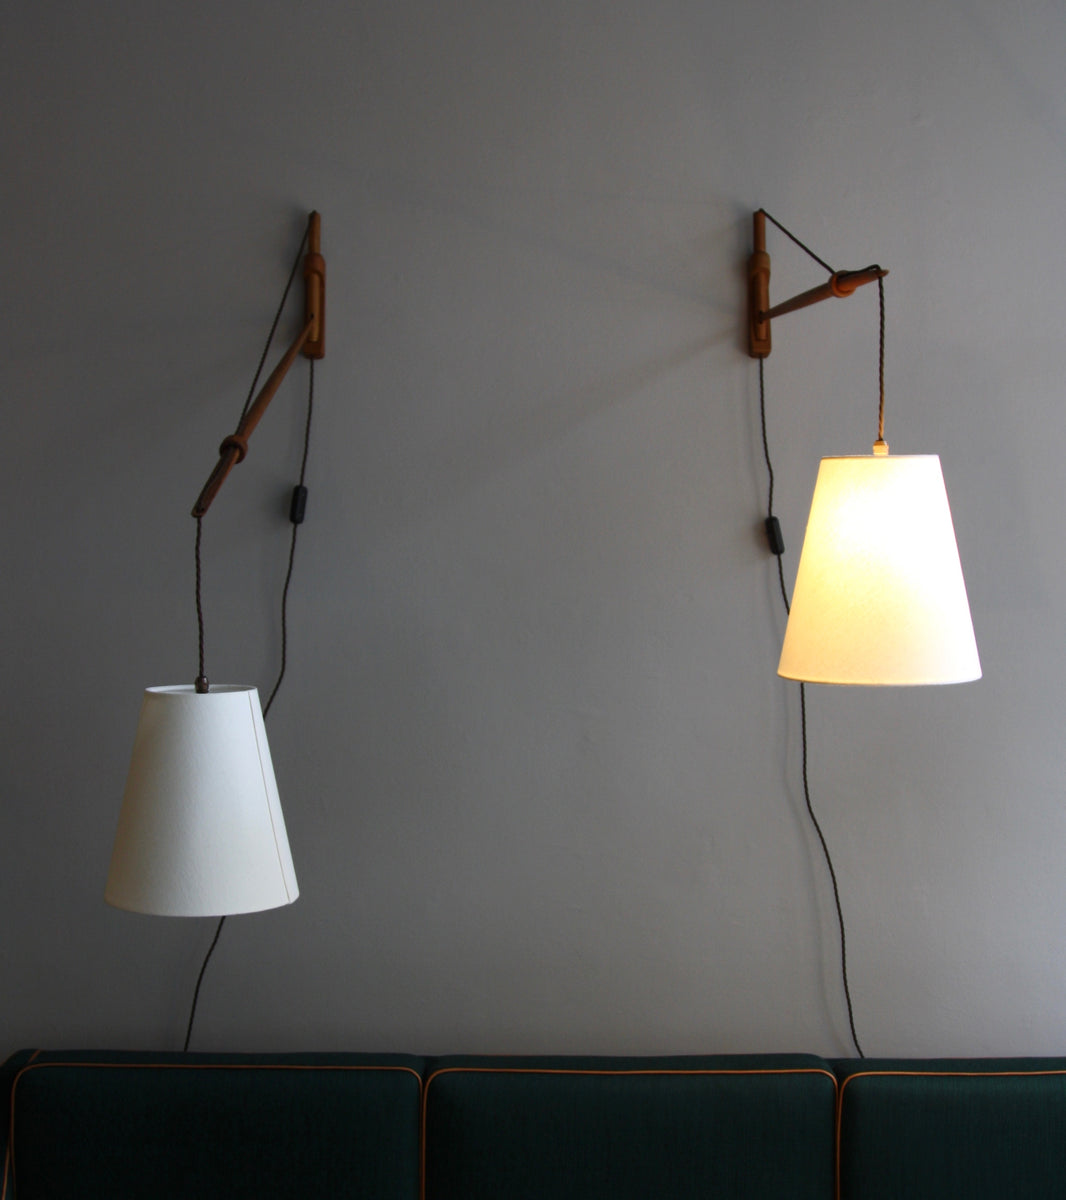 Articulated Arc Wall Lamps / Lisa Johansson-Pape, 1954